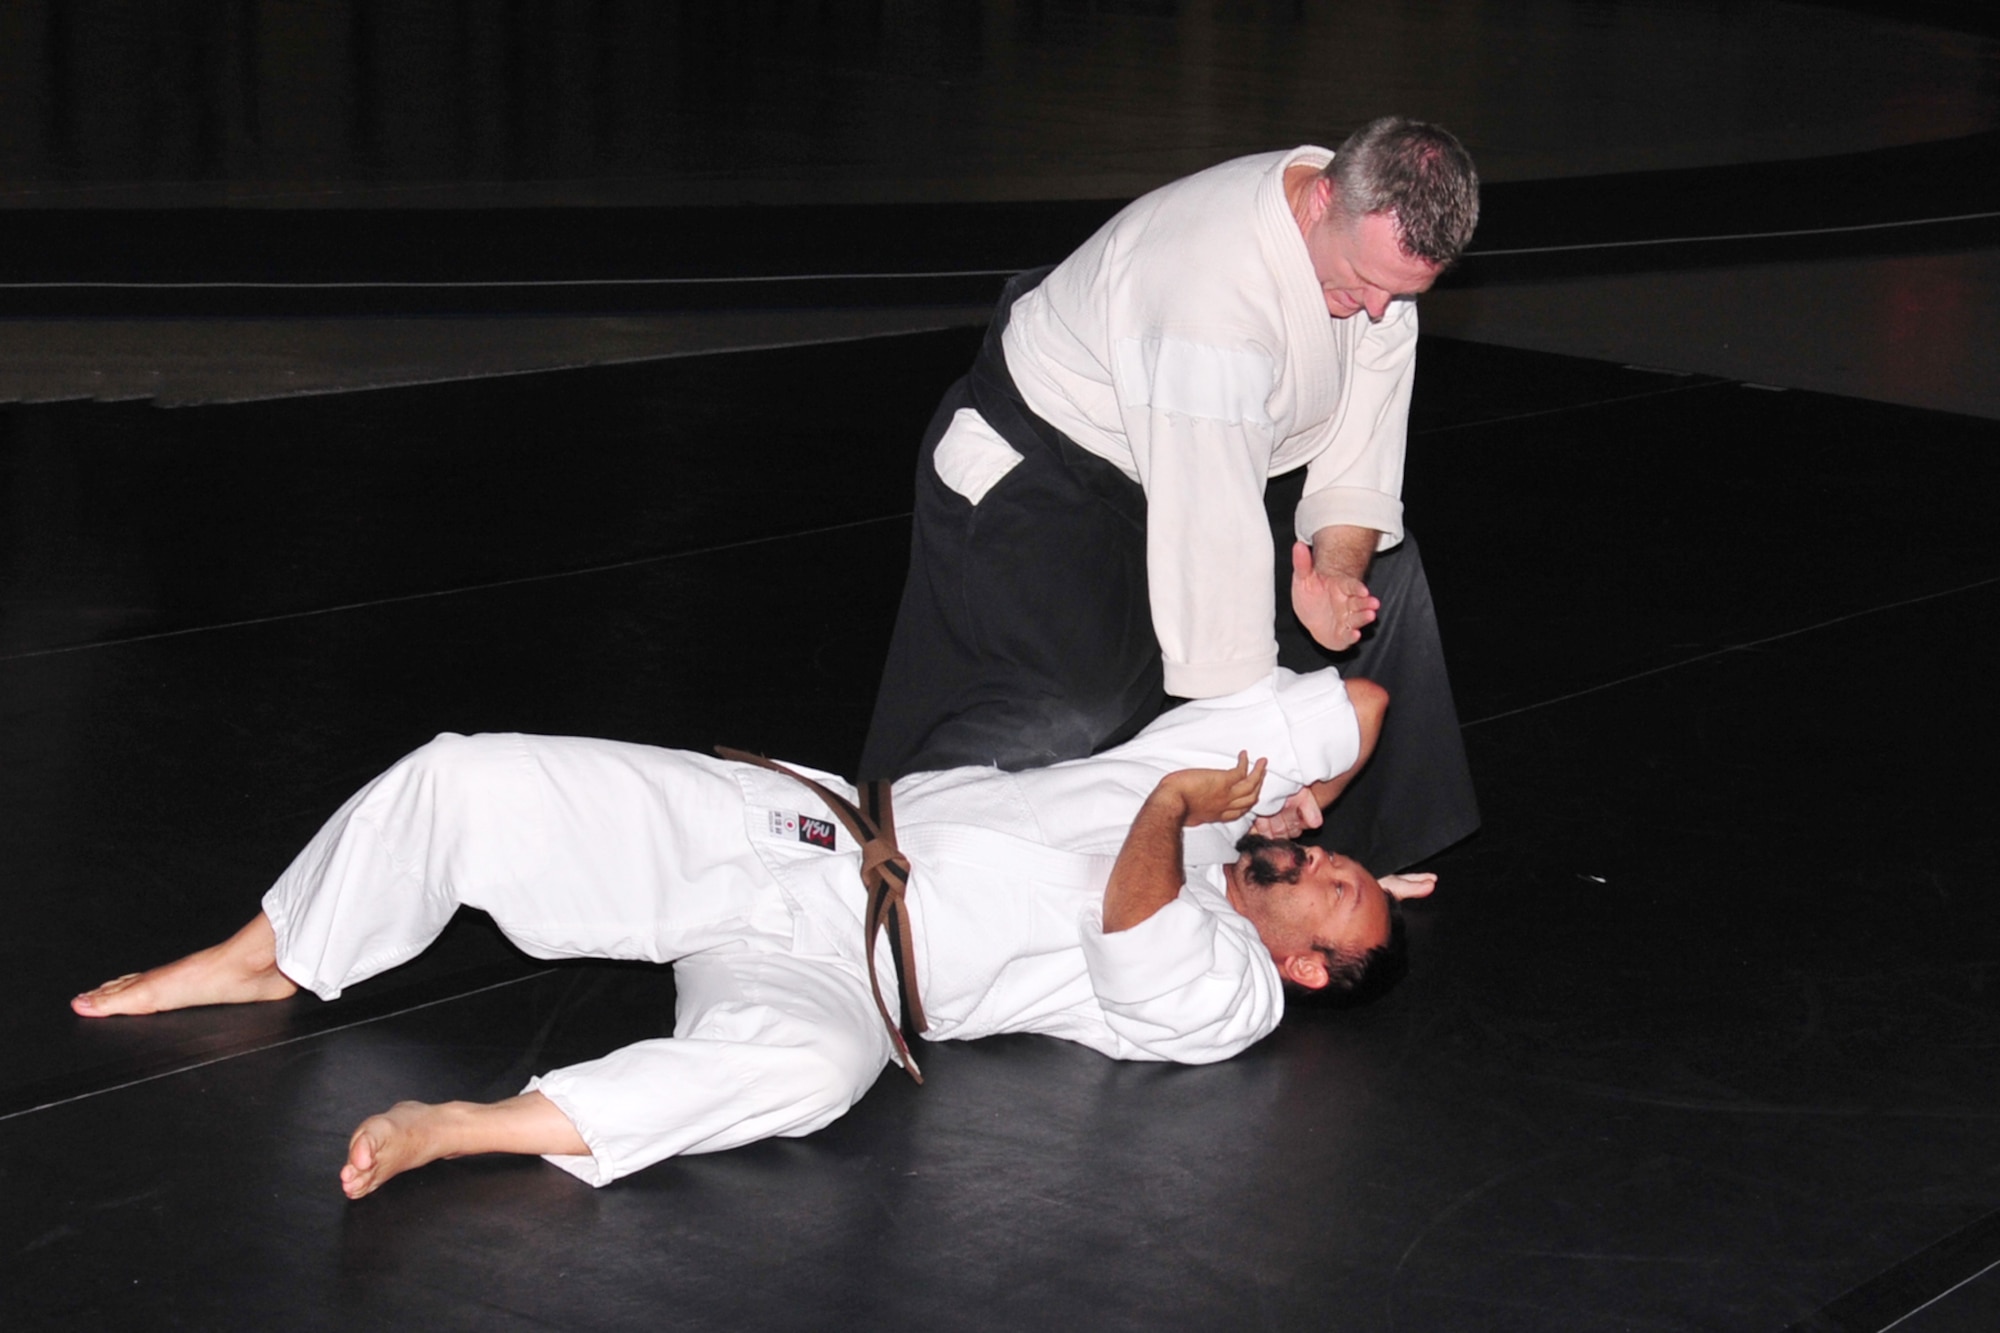 U.S. Navy Reserve Lt. Cmdr. Lloyd McWhirt demonstrates an Akido throwing technique on his assistant, Brad Clear, May 22 at the field house on Offutt Air Force Base, Nebraska. McWhirt runs his own Dojo in downtown Omaha and gives free Aikido lessons to the Offutt community at the Offutt Field House. (U.S. Air Force photo by D.P. Heard/Released)